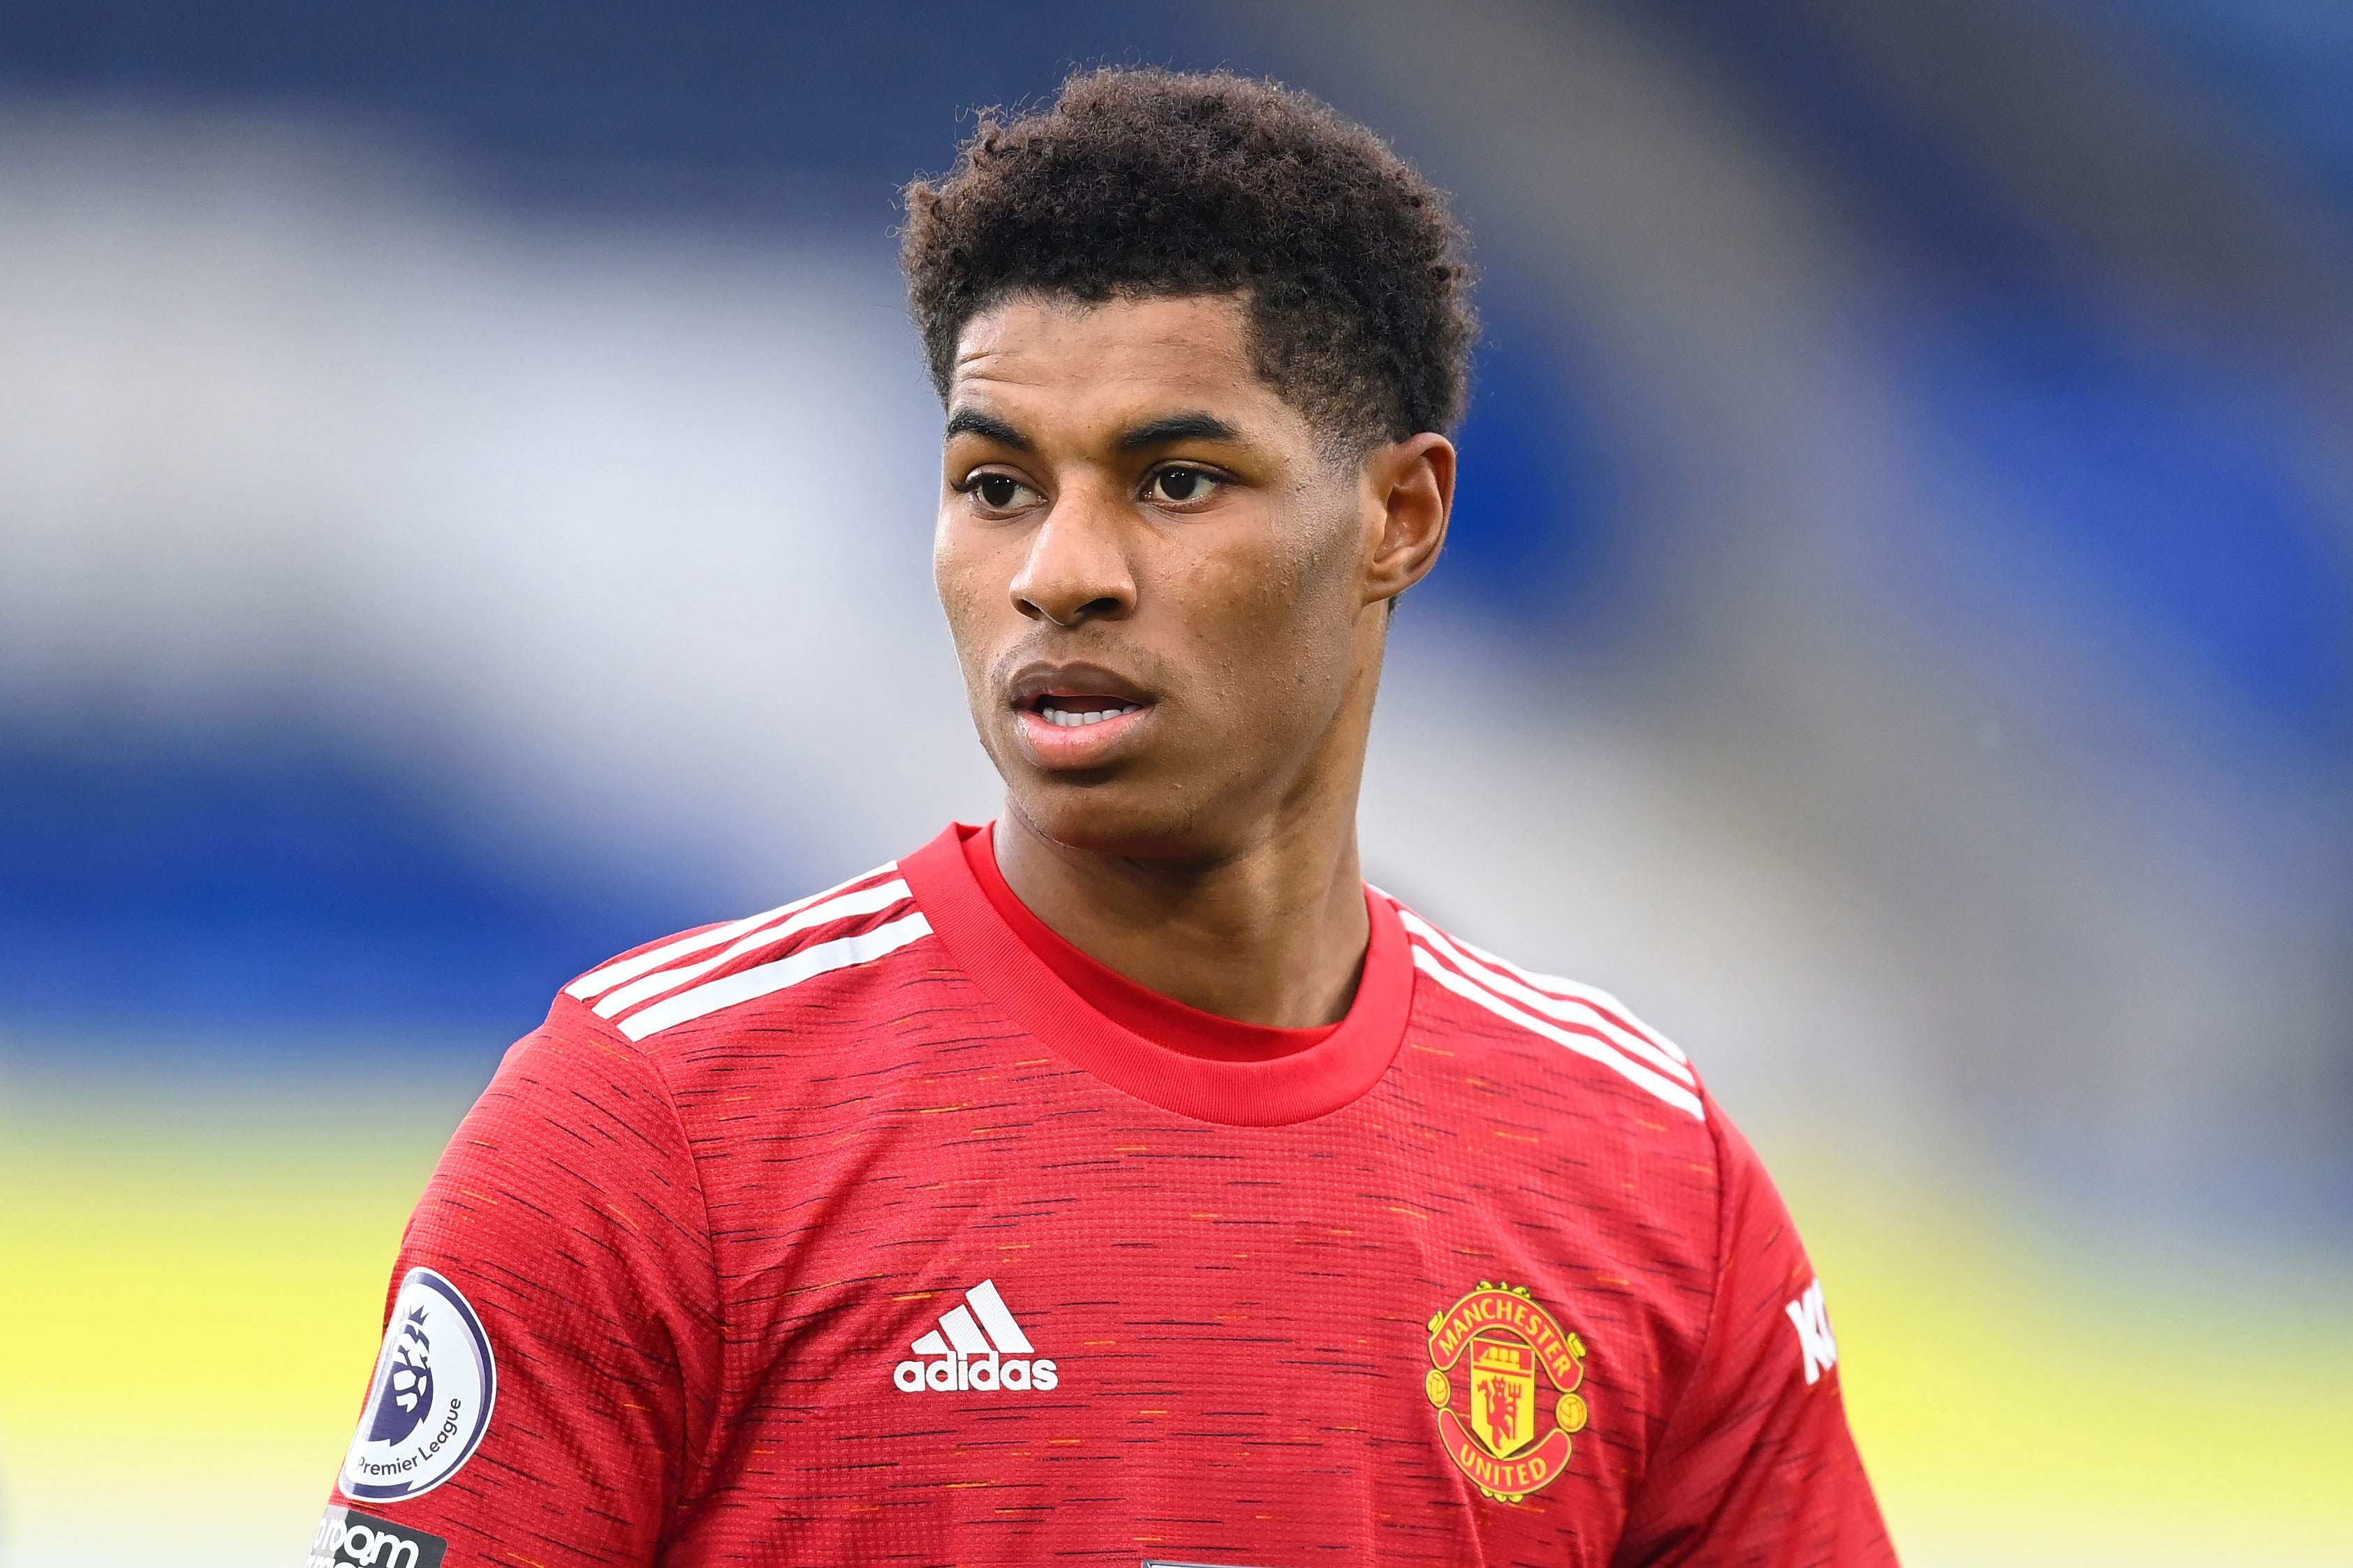 Marcus Rashford of Manchester United is pictured during a match in Leicester, England, on December 26, 2020.